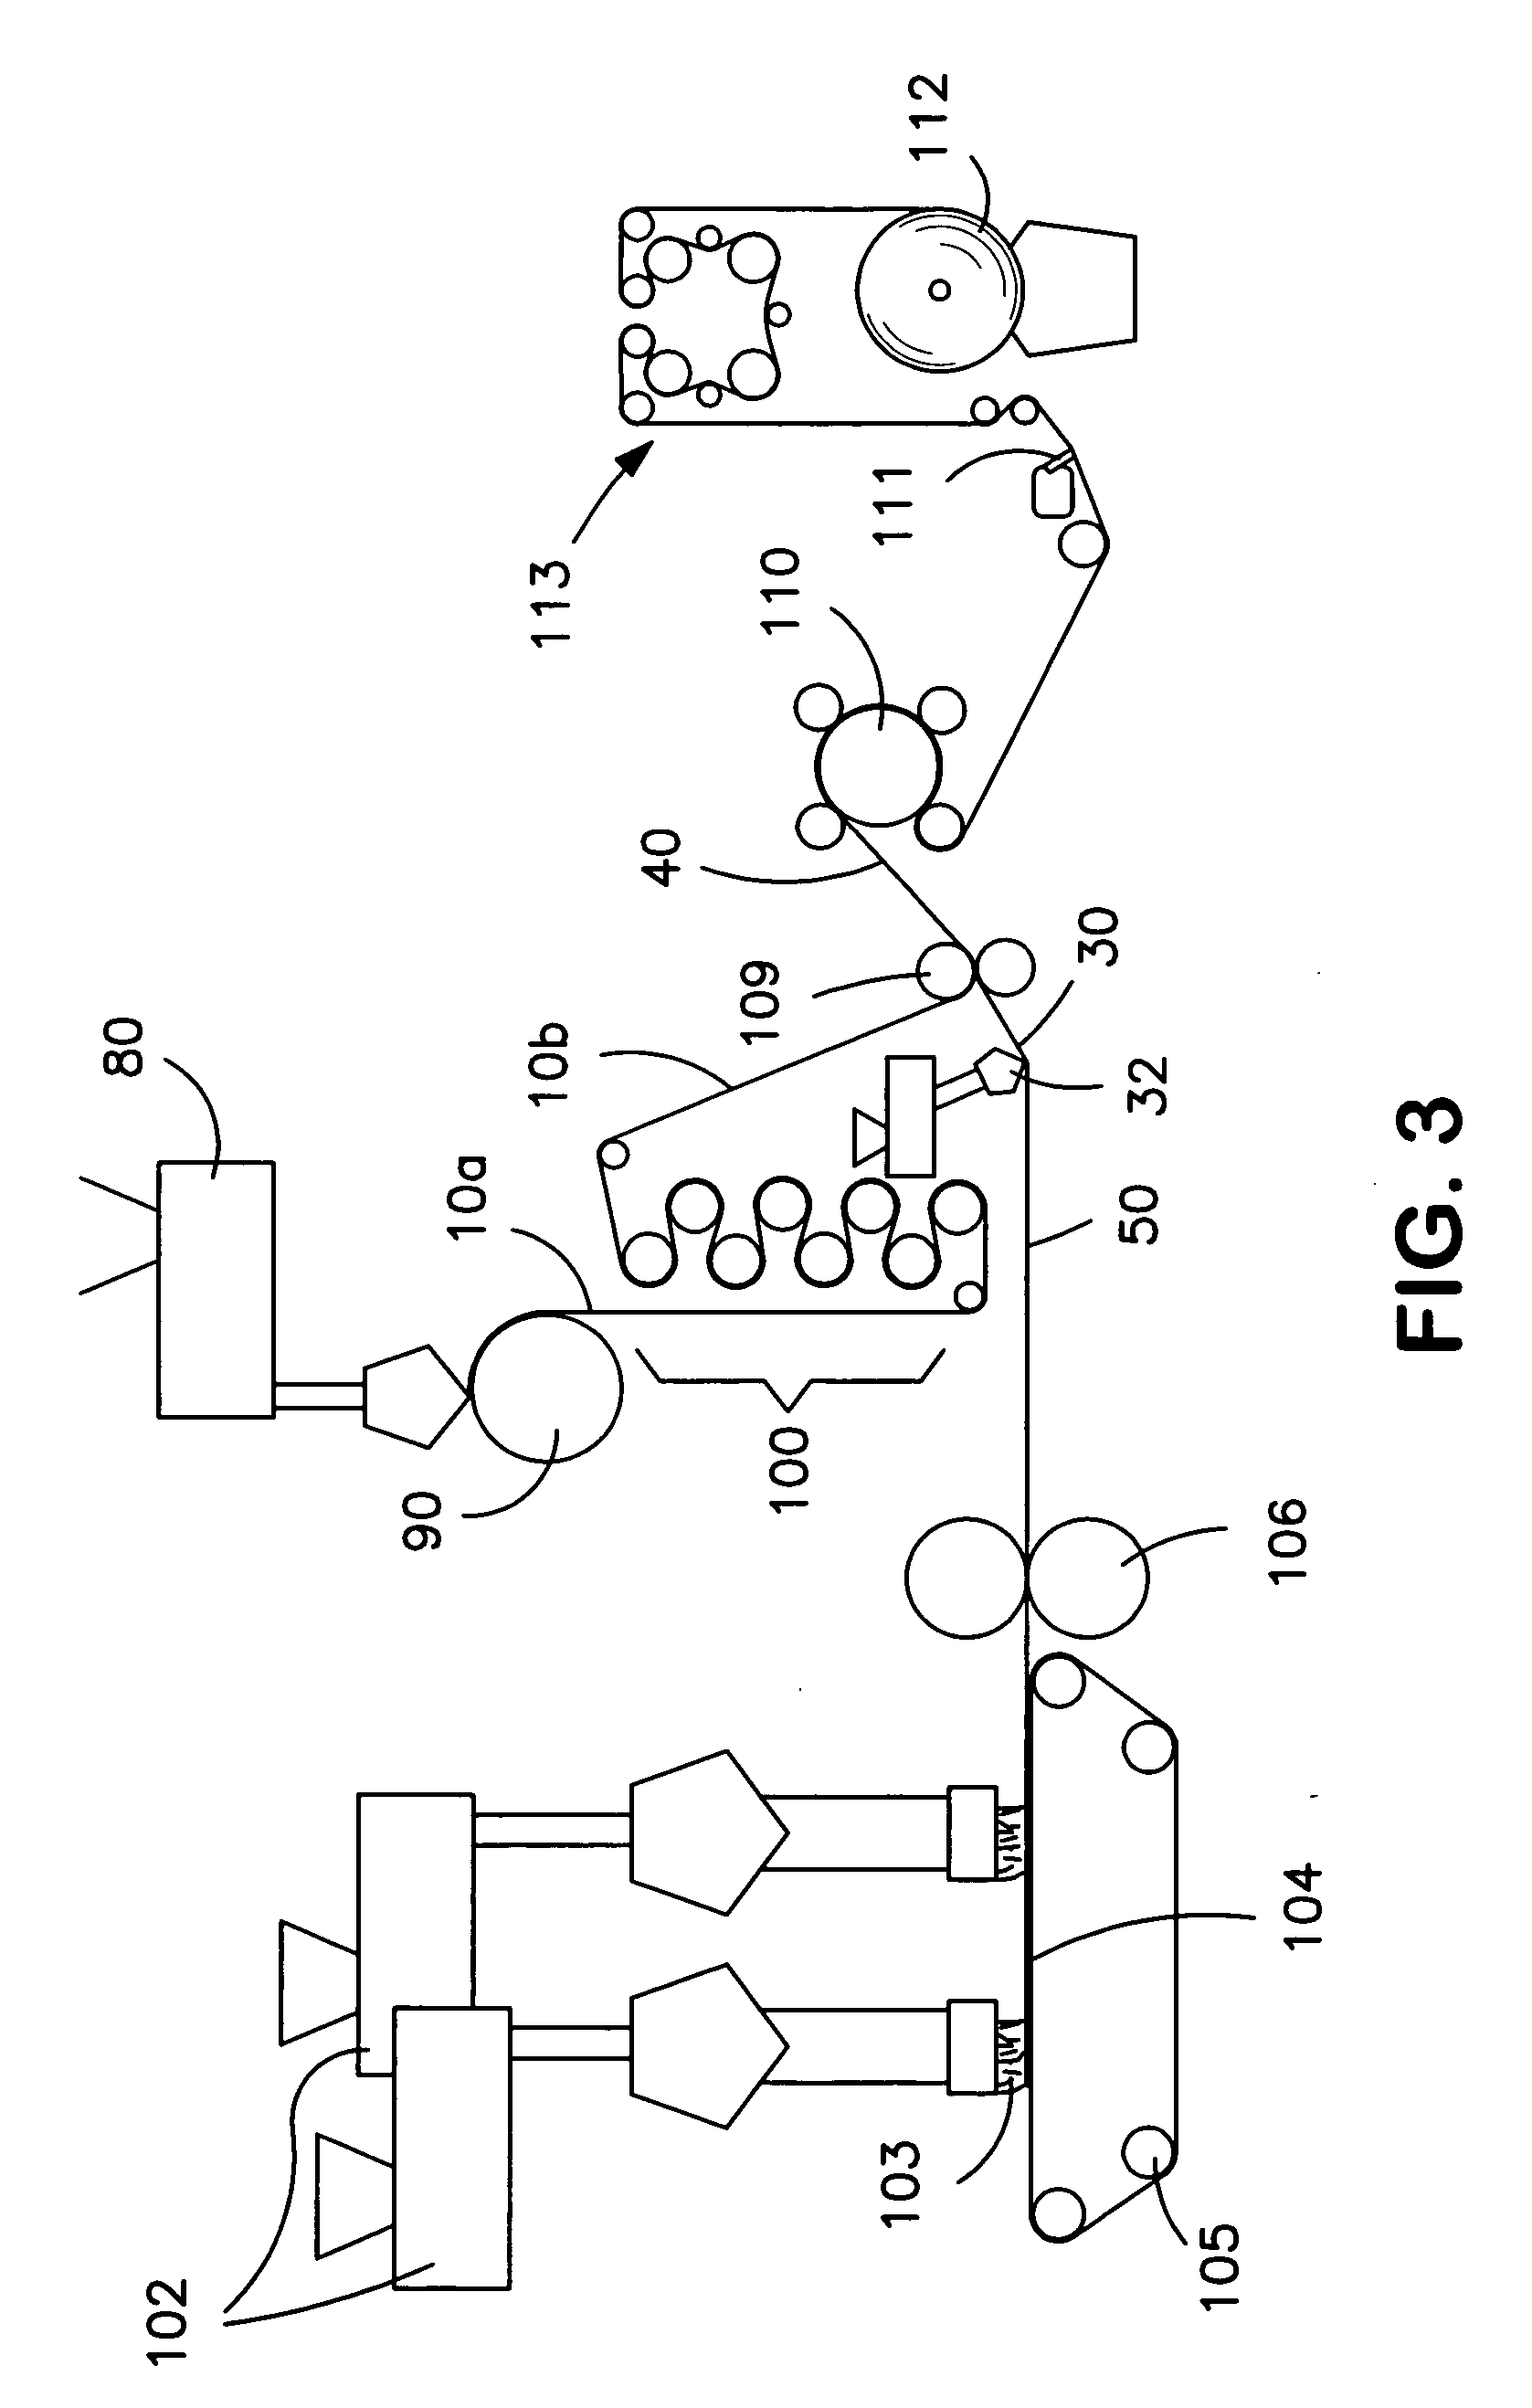 Multilayer film structure with higher processability